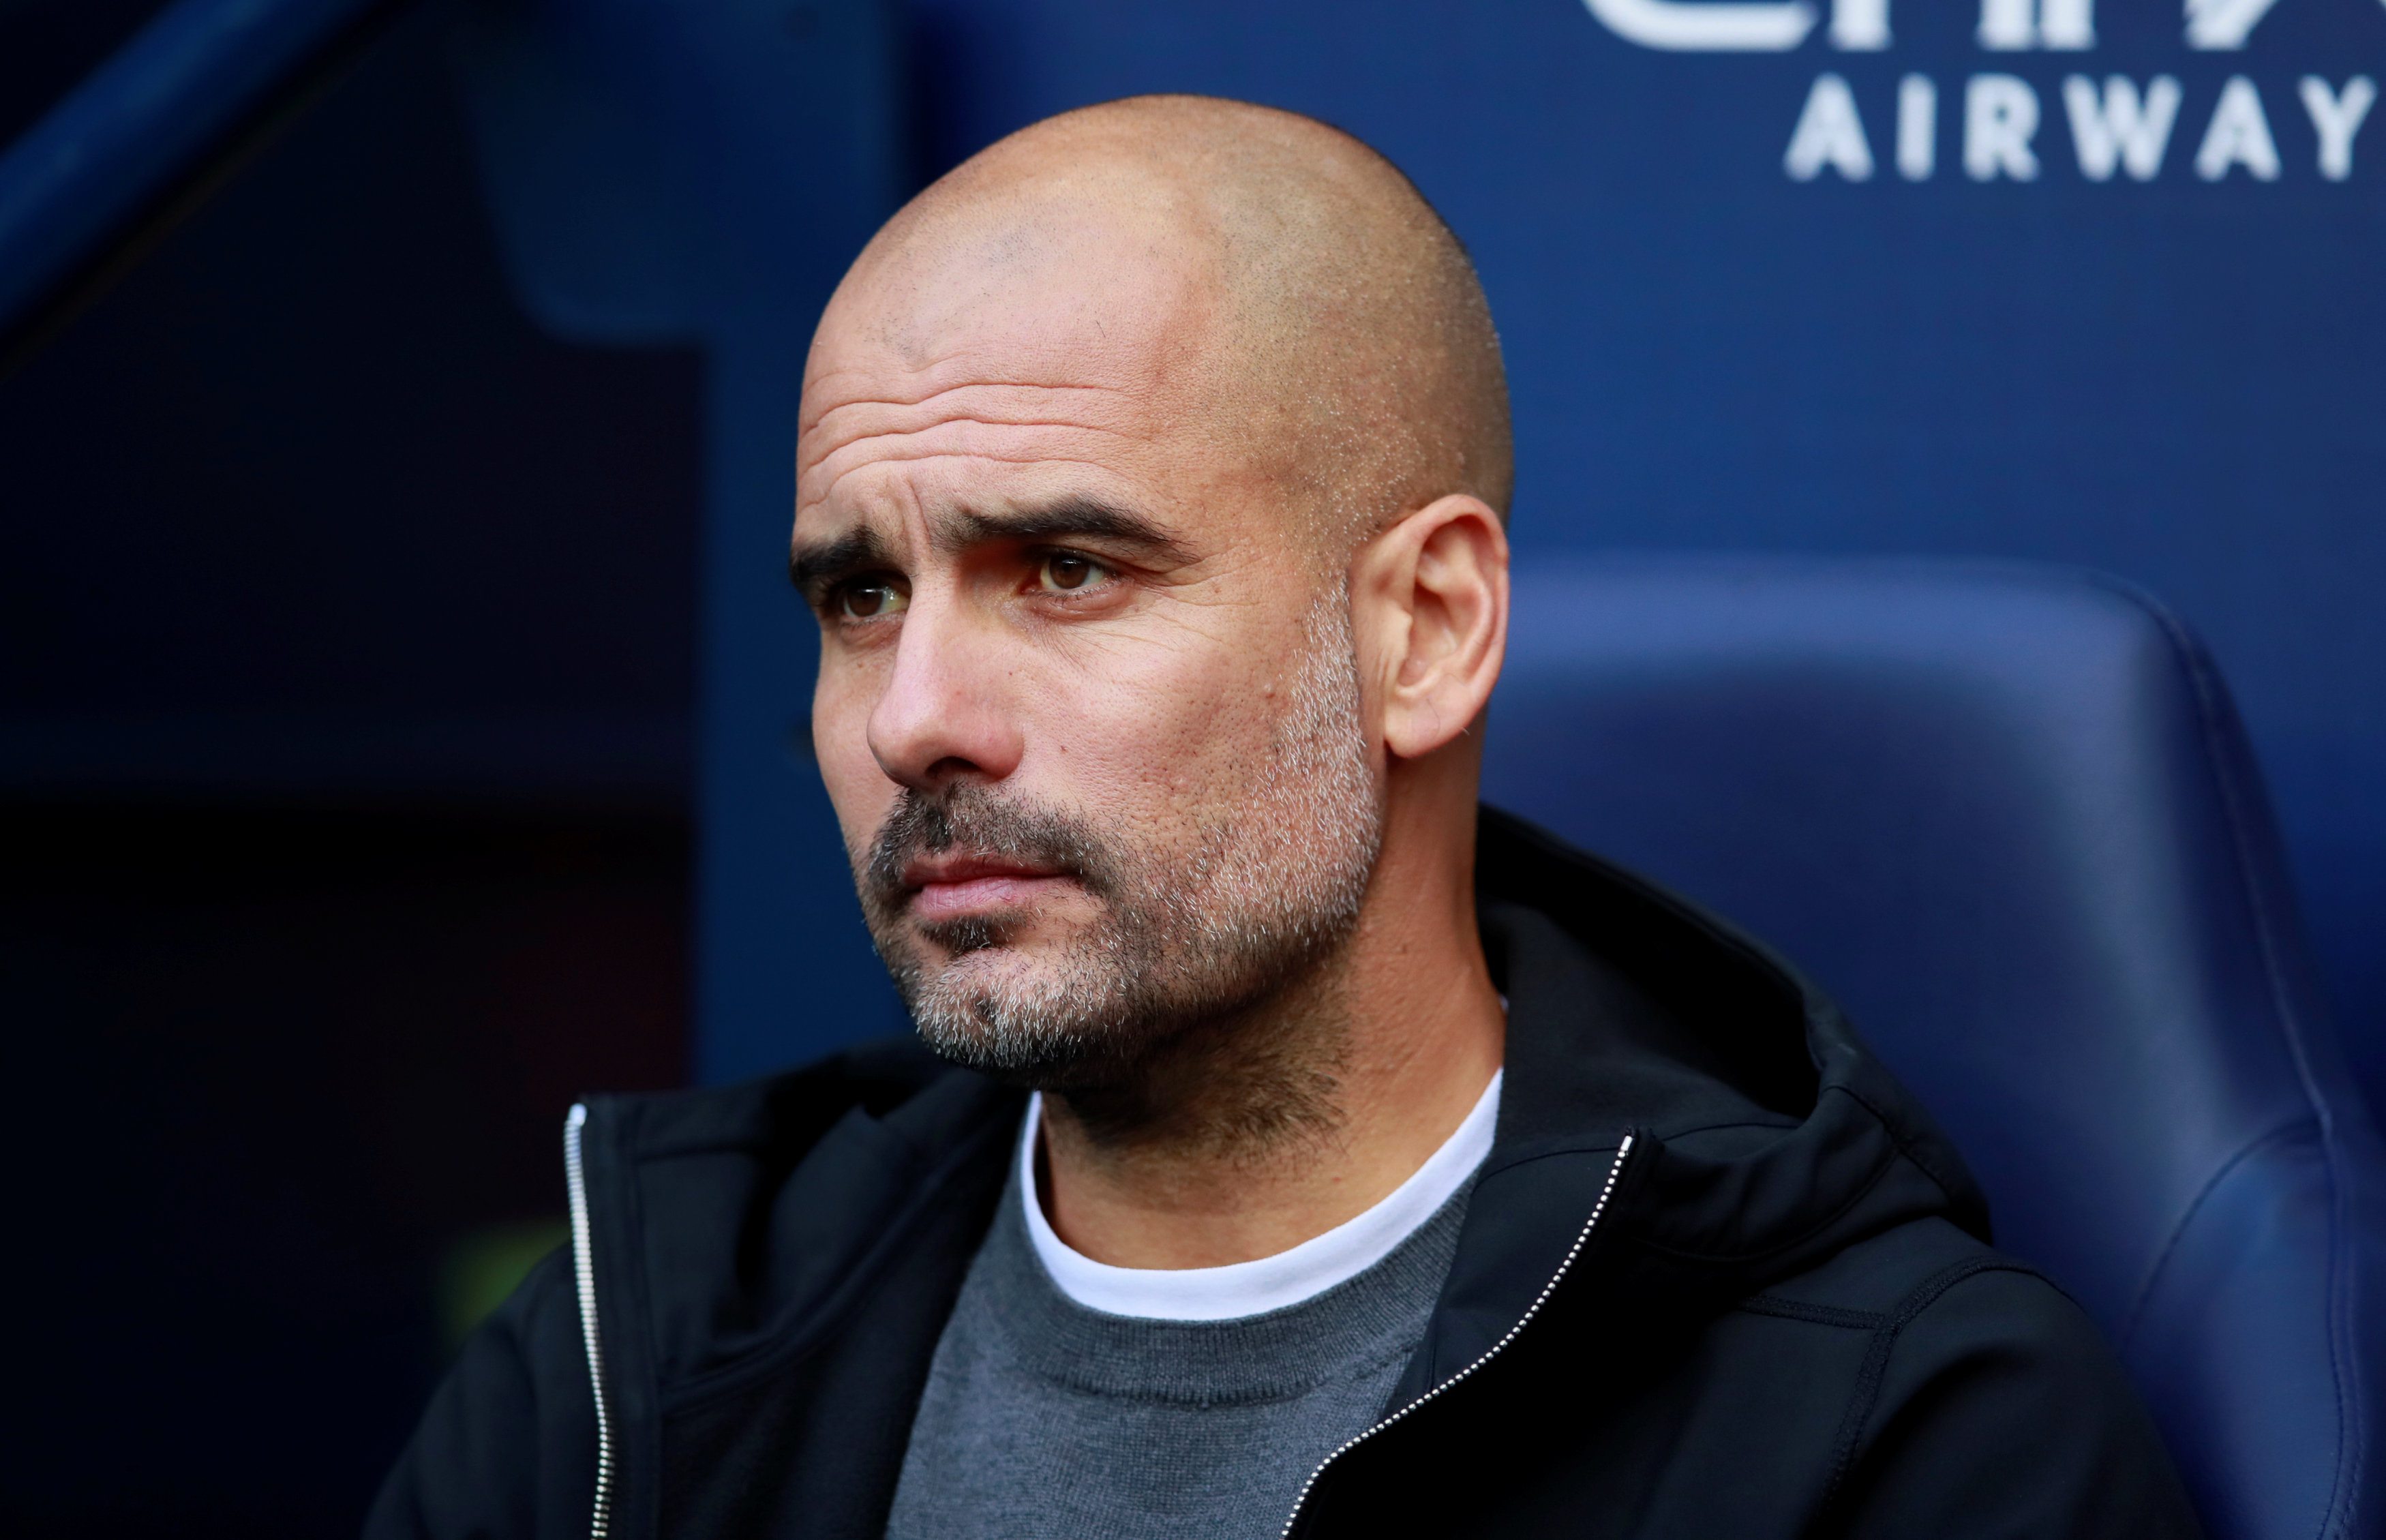 Football: Man City cannot take Napoli lightly in Champions League, says Pep Guardiola